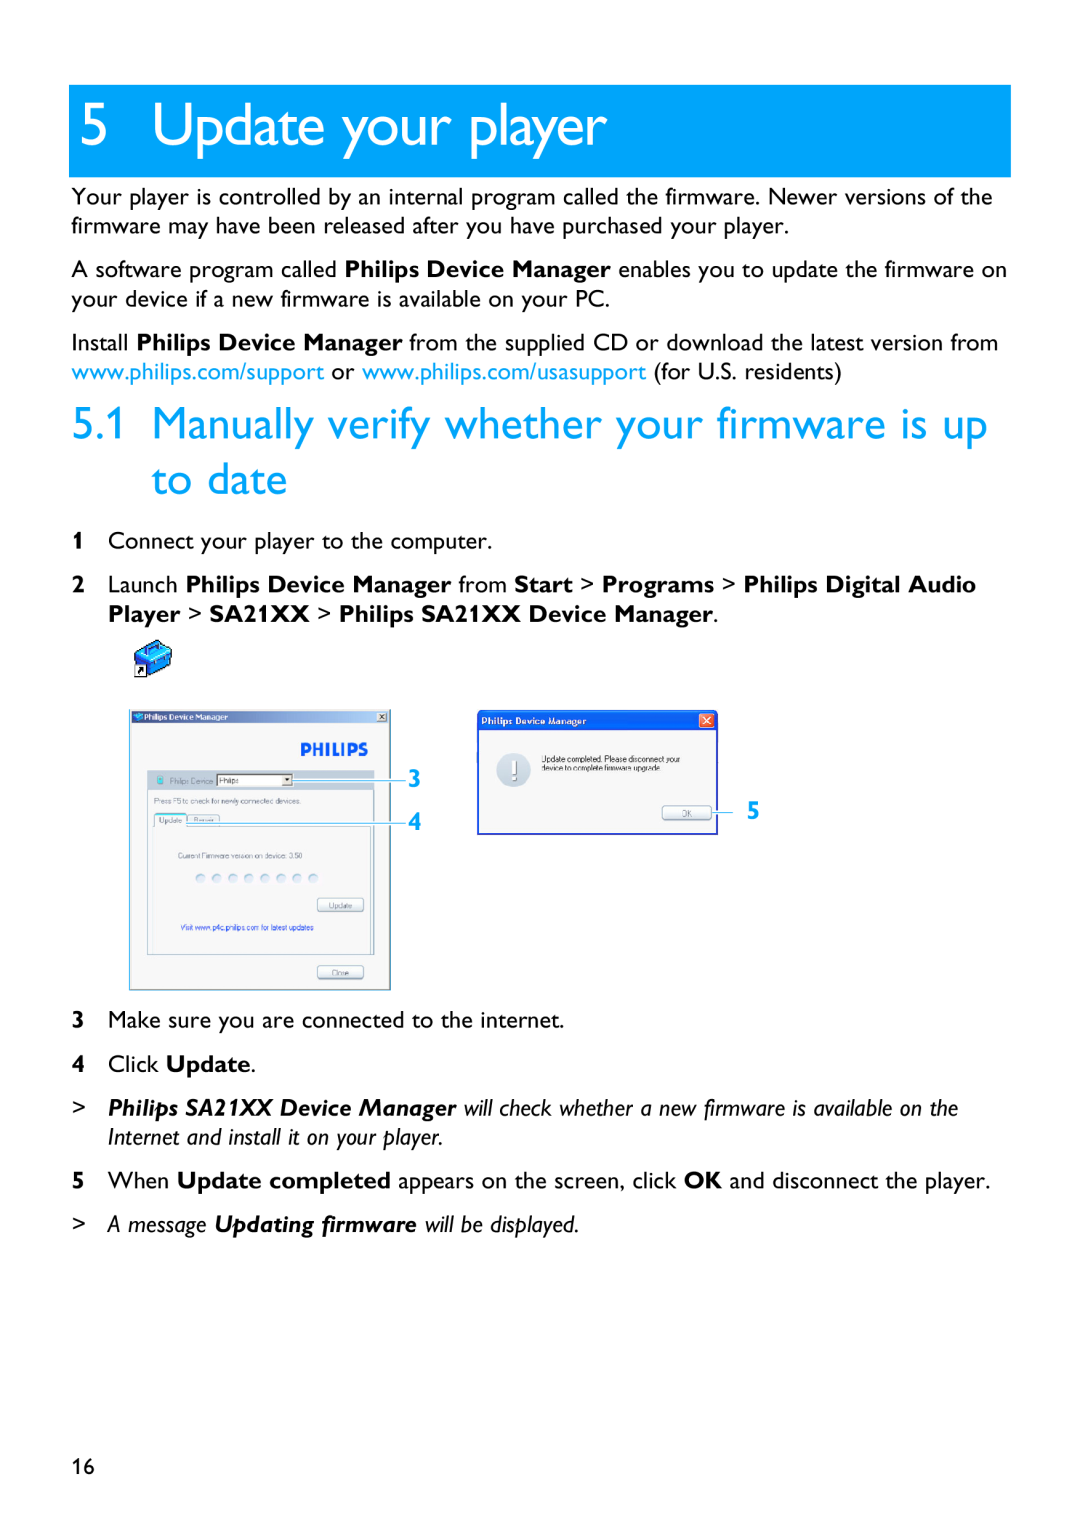 Philips SA2100 manual Update your player, Manually verify whether your firmware is up to date 